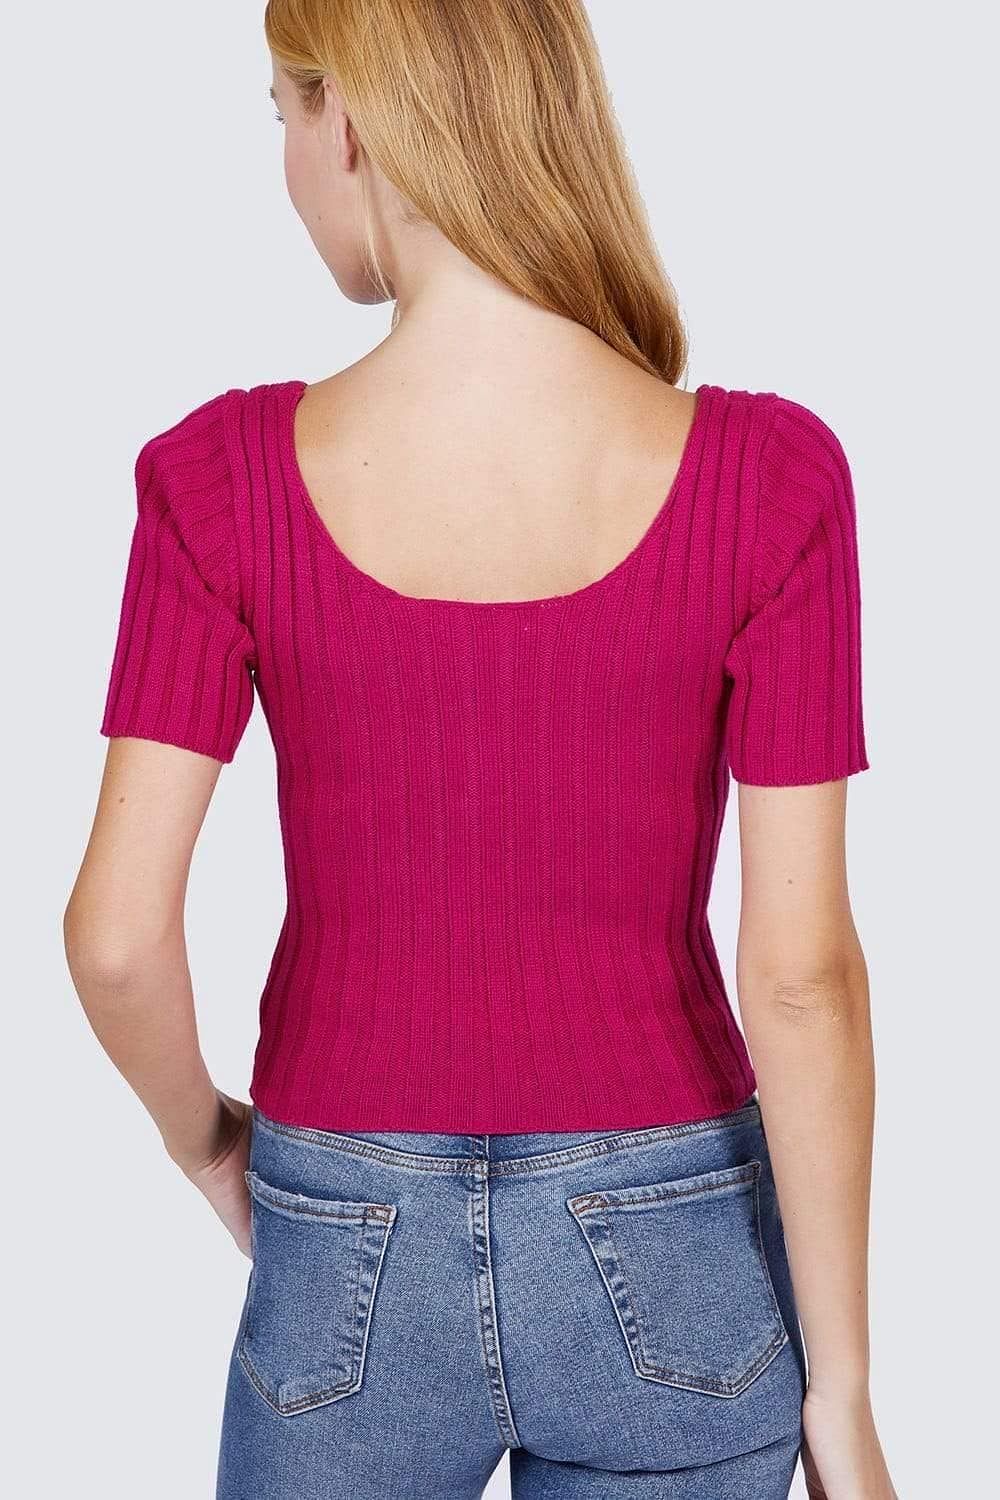 Fuchsia Short Sleeve Rib Knitted Sweater - Shopping Therapy S Top